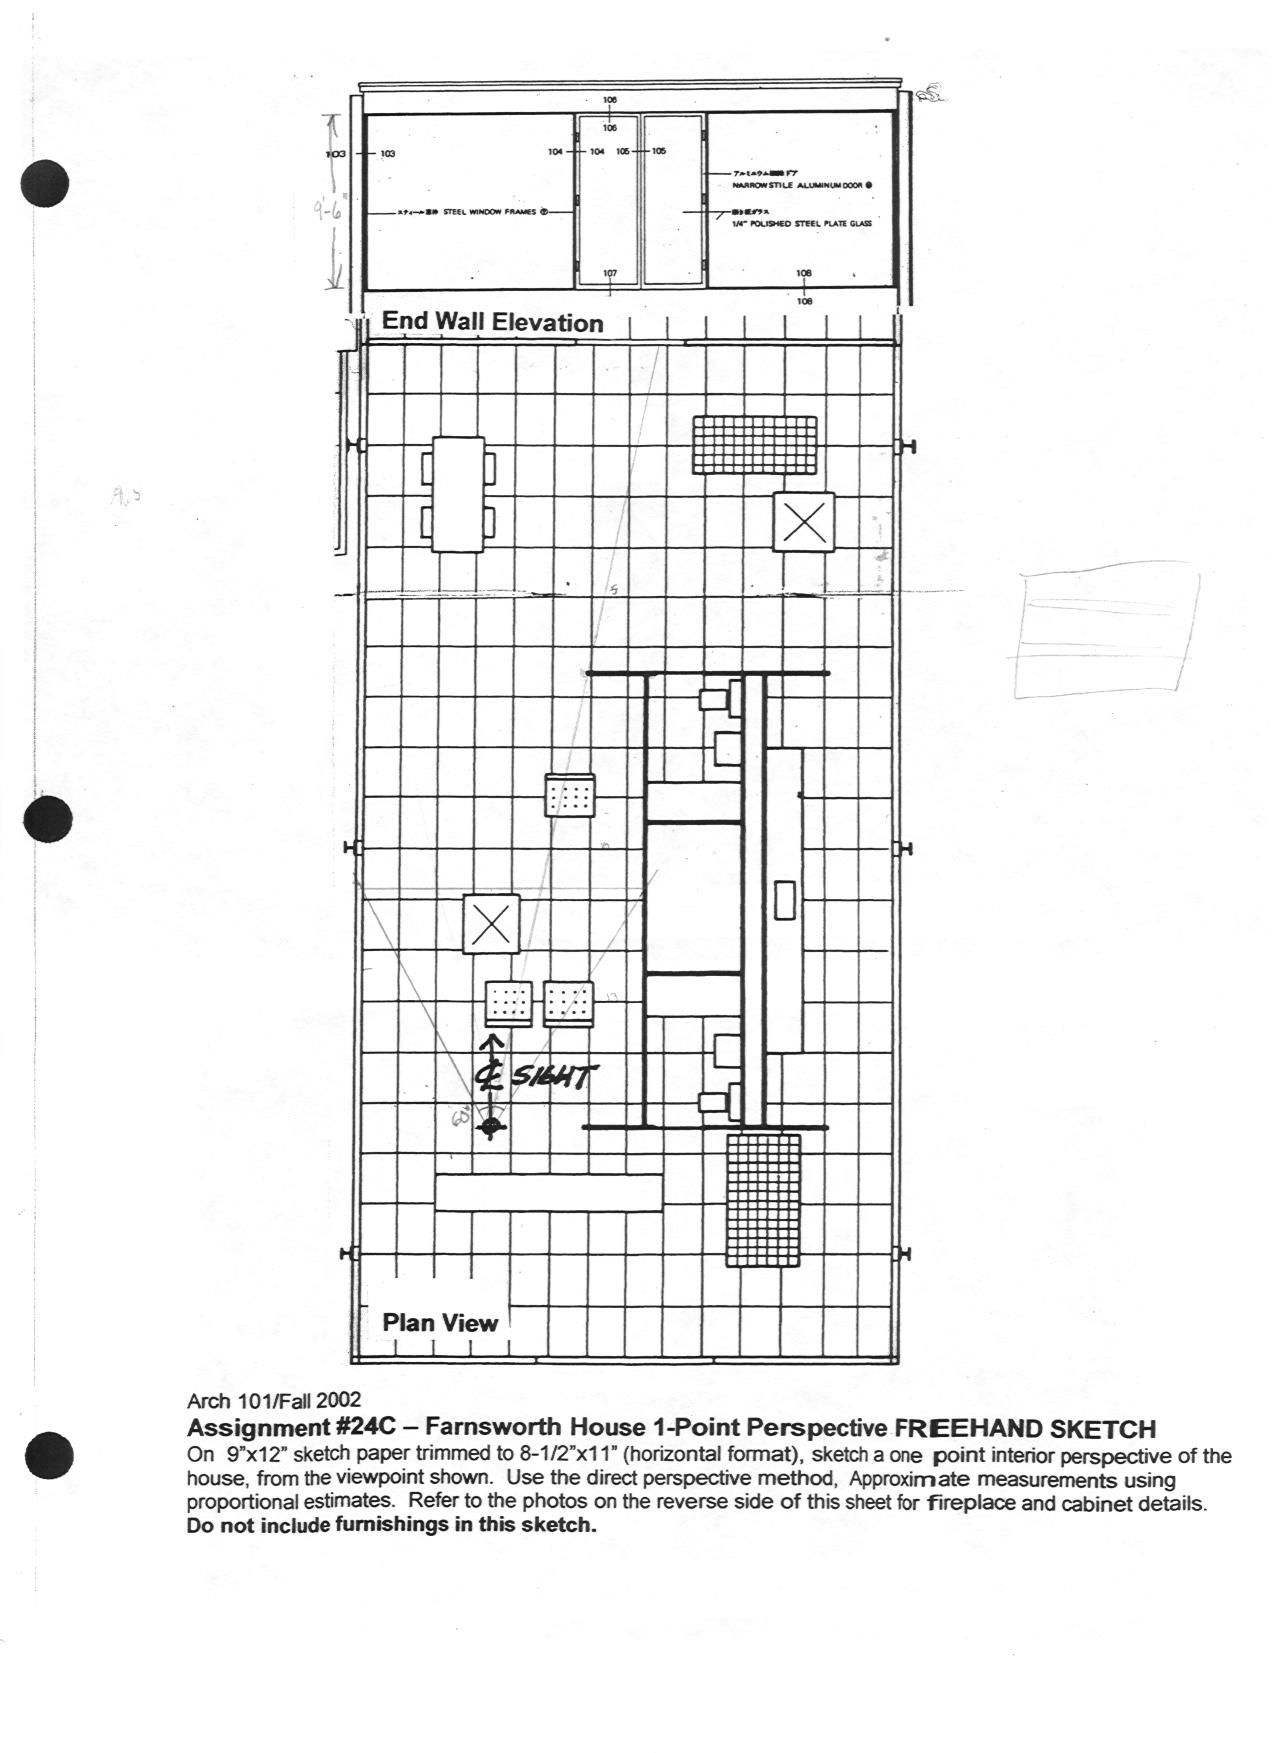 Farnsworth House Construction Plans Tugendhat House Plans